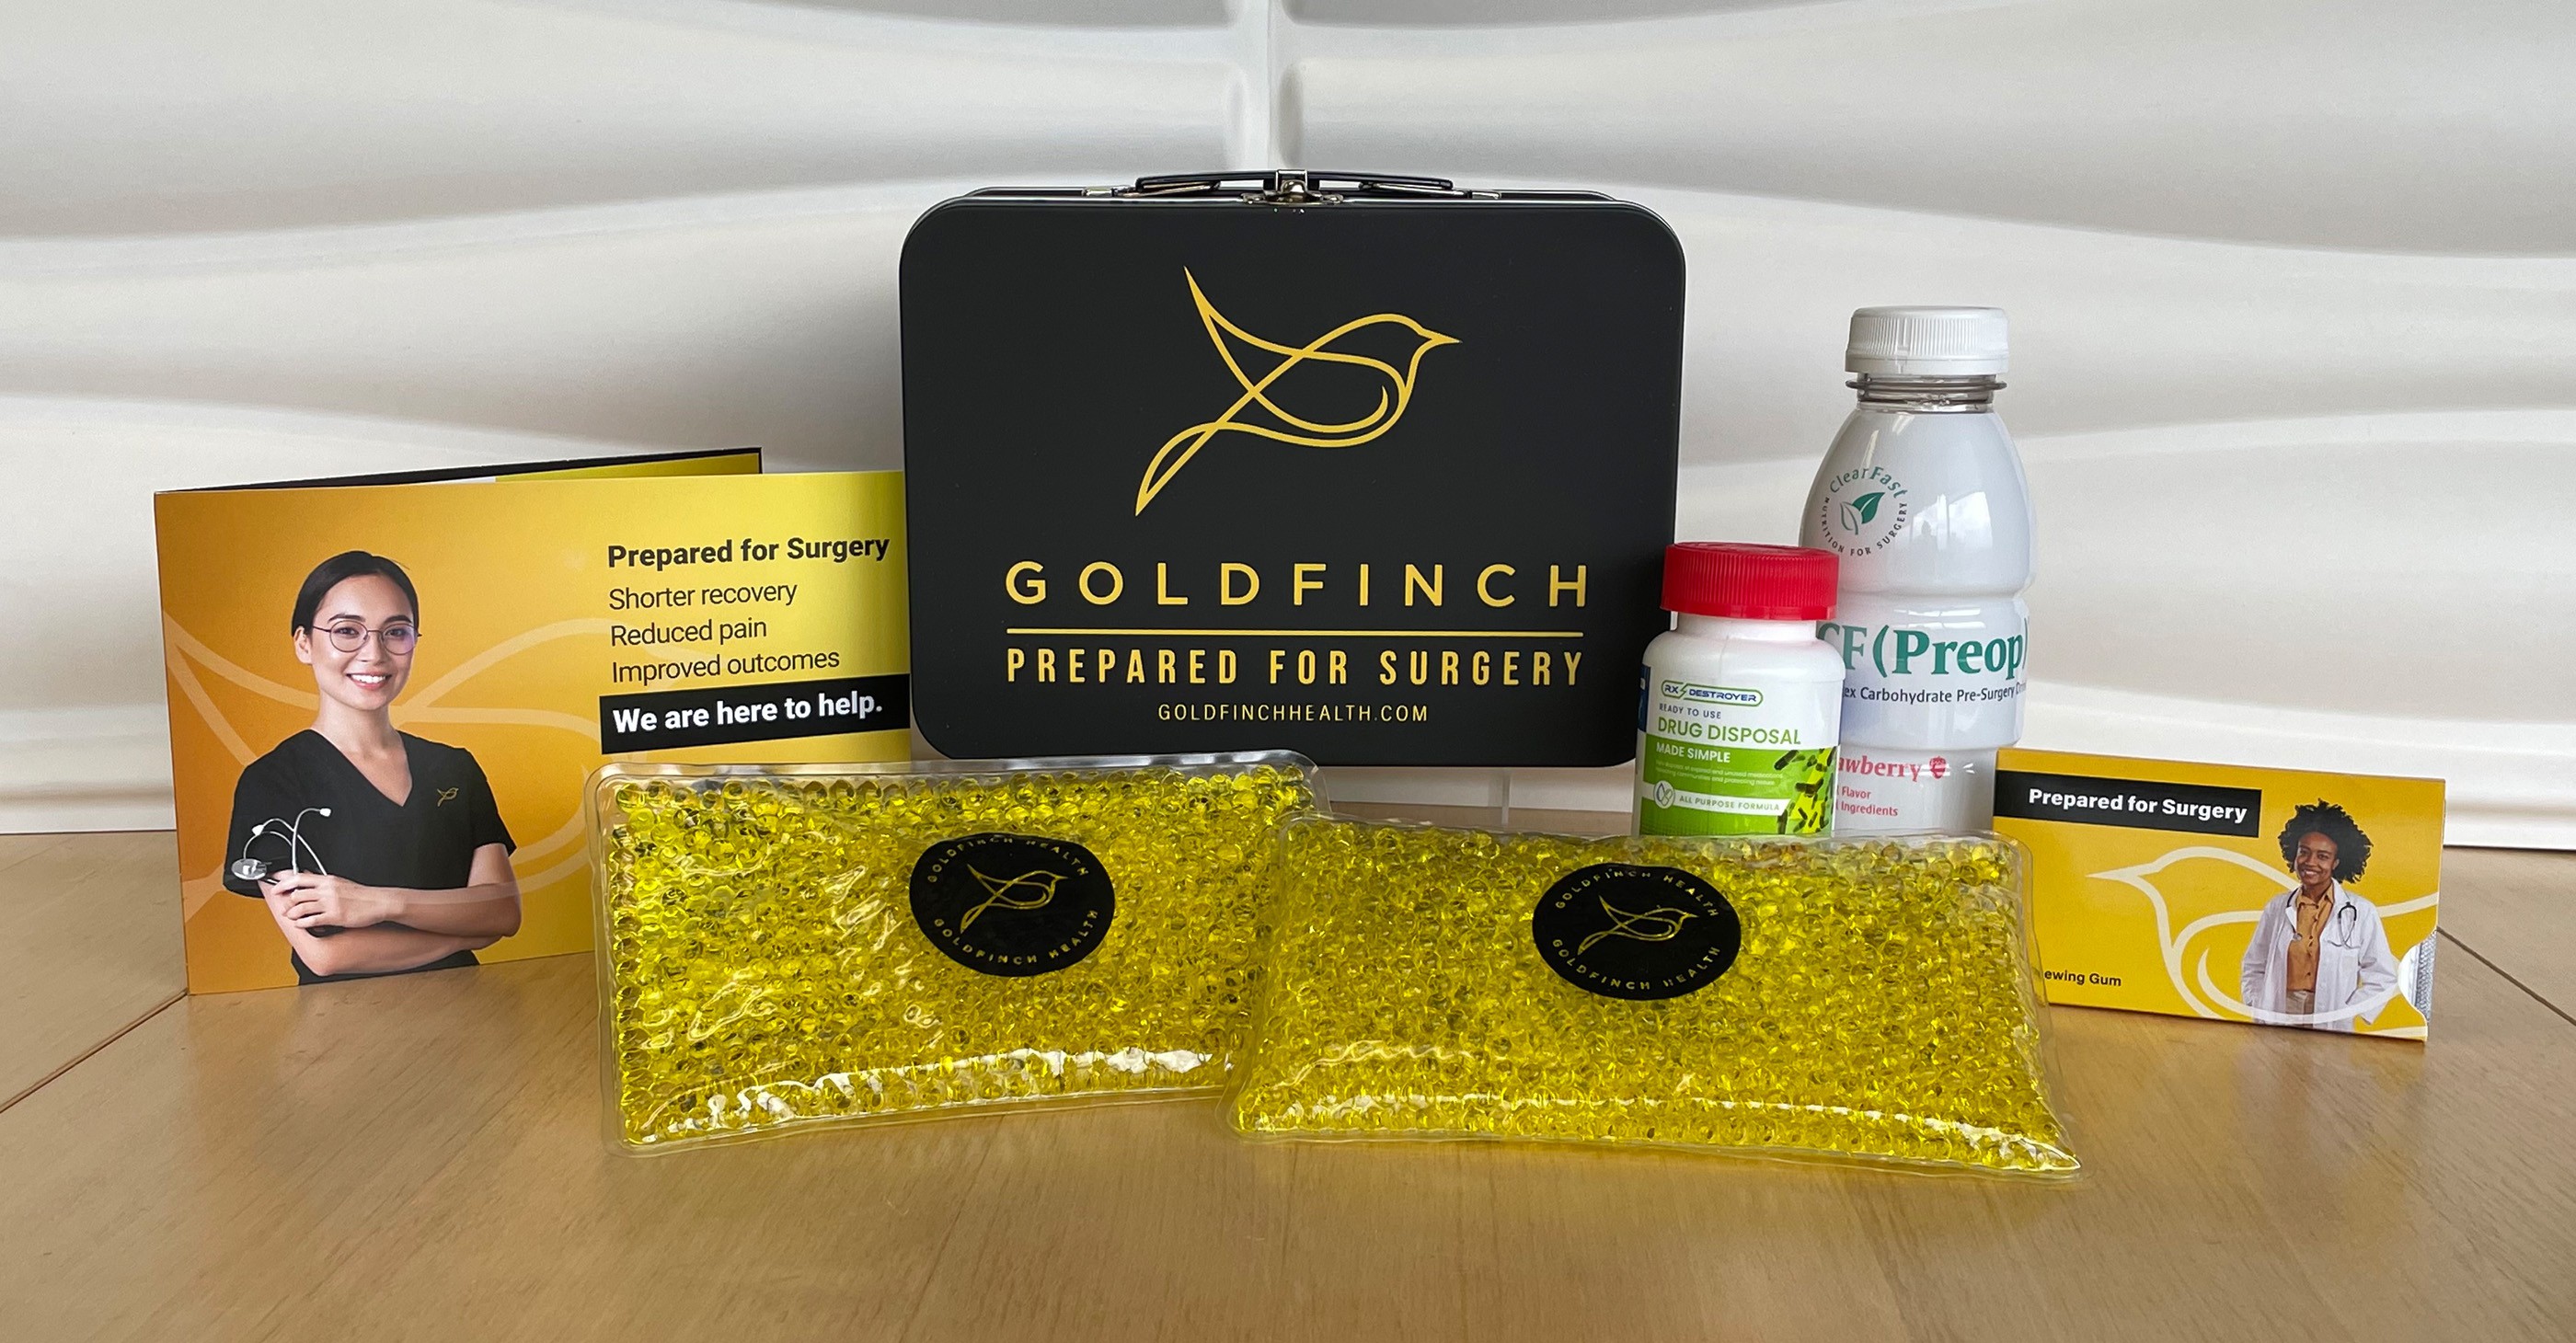 Goldfinch Health - prepared for surgery tool kit